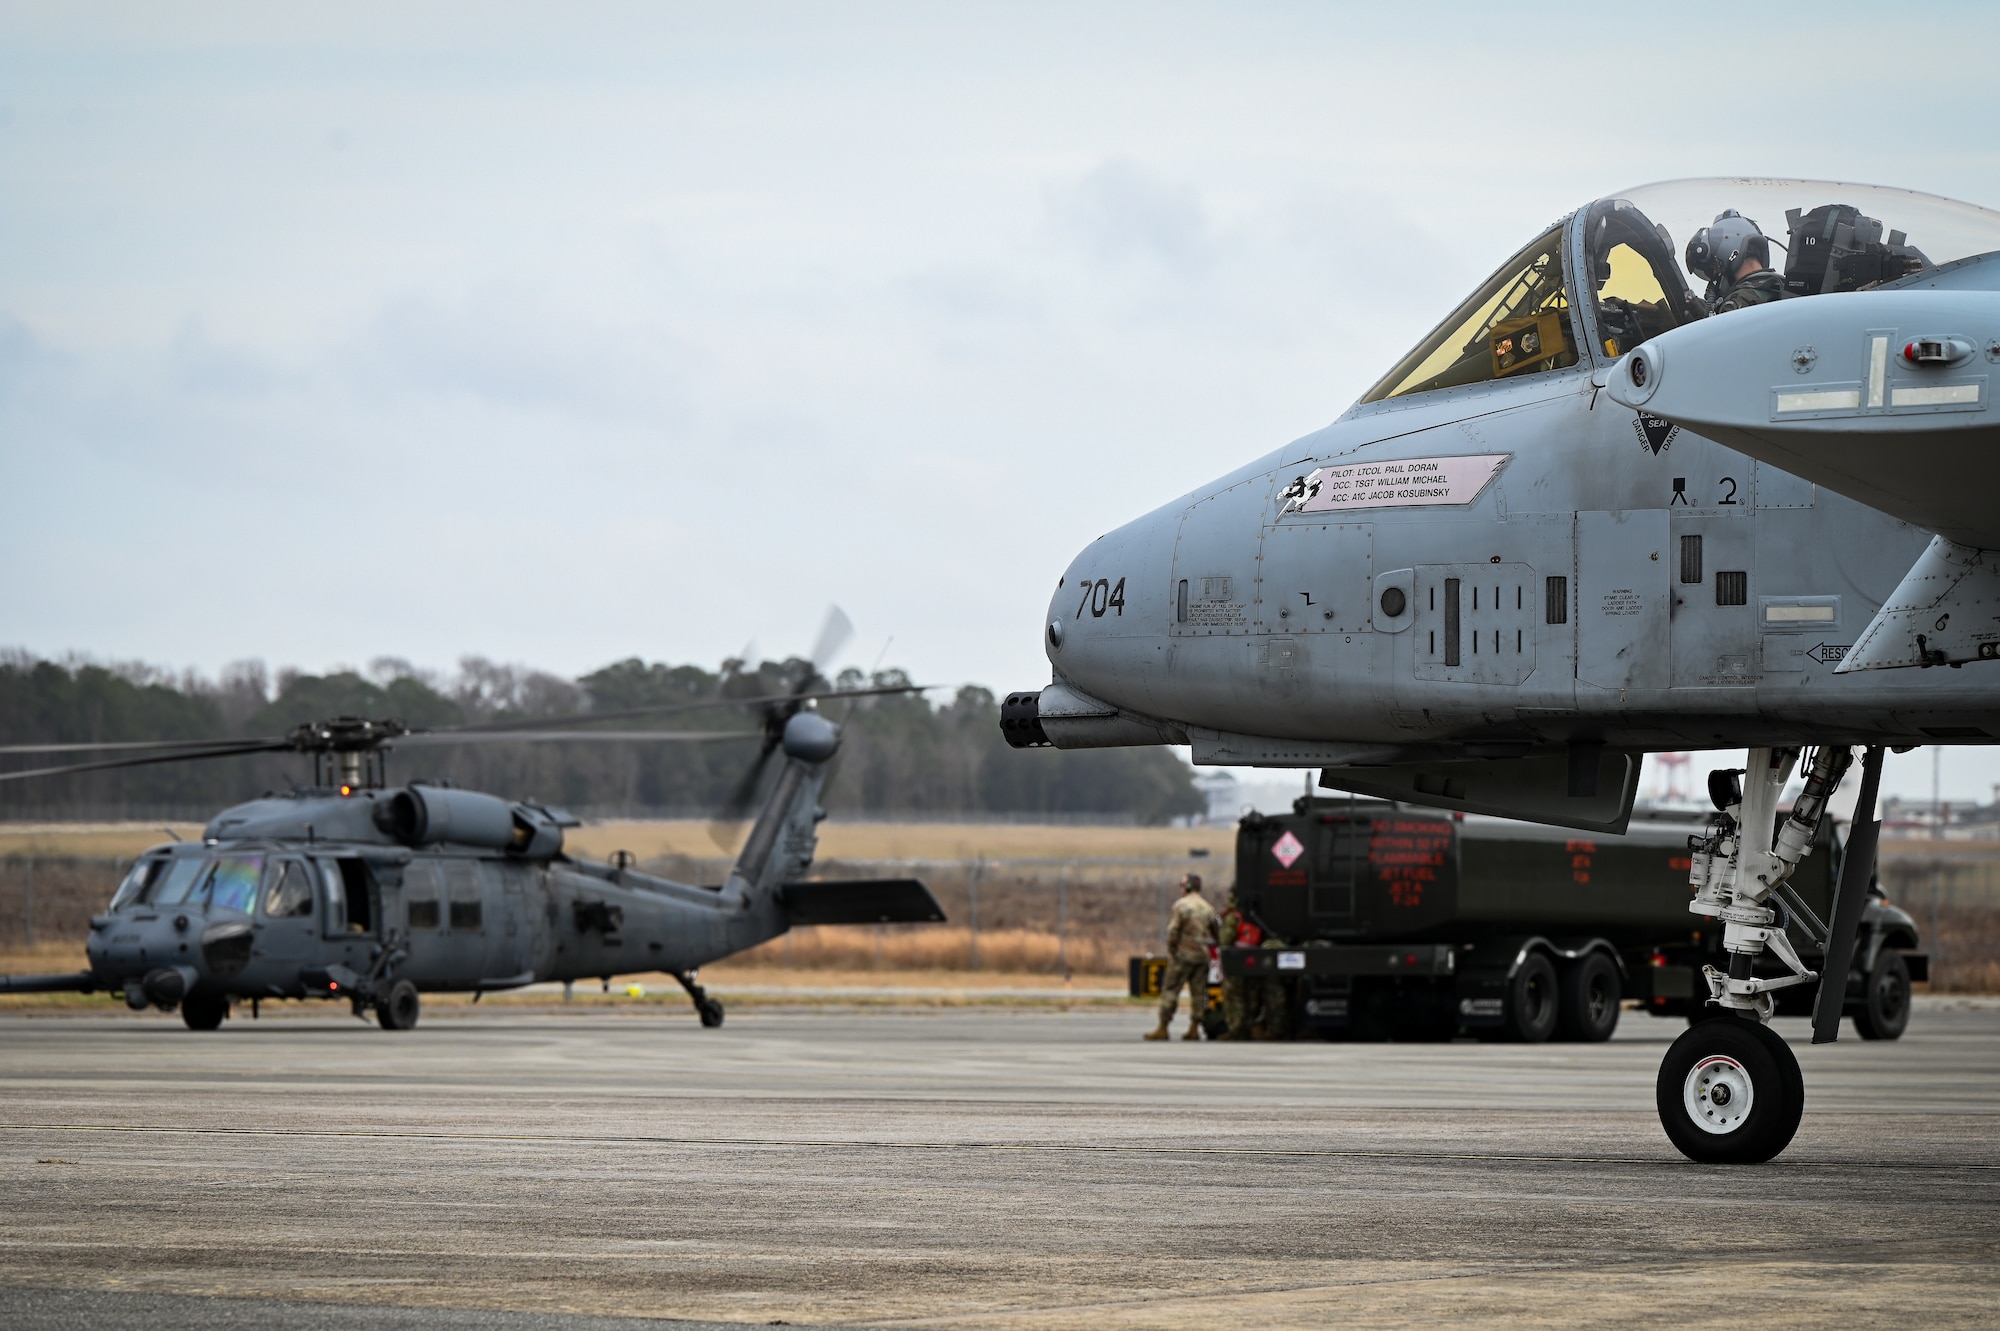 A U.S. Air Force A-10C Thunderbolt II from the 175th Wing, Maryland Air National Guard, taxis past a HH-60G Pave Hawk being refueled at Hunter Army Airfield, Georgia, Jan 25, 2023 during exercise Sunshine Rescue, hosted by the Savannah Combat Readiness Training Center.